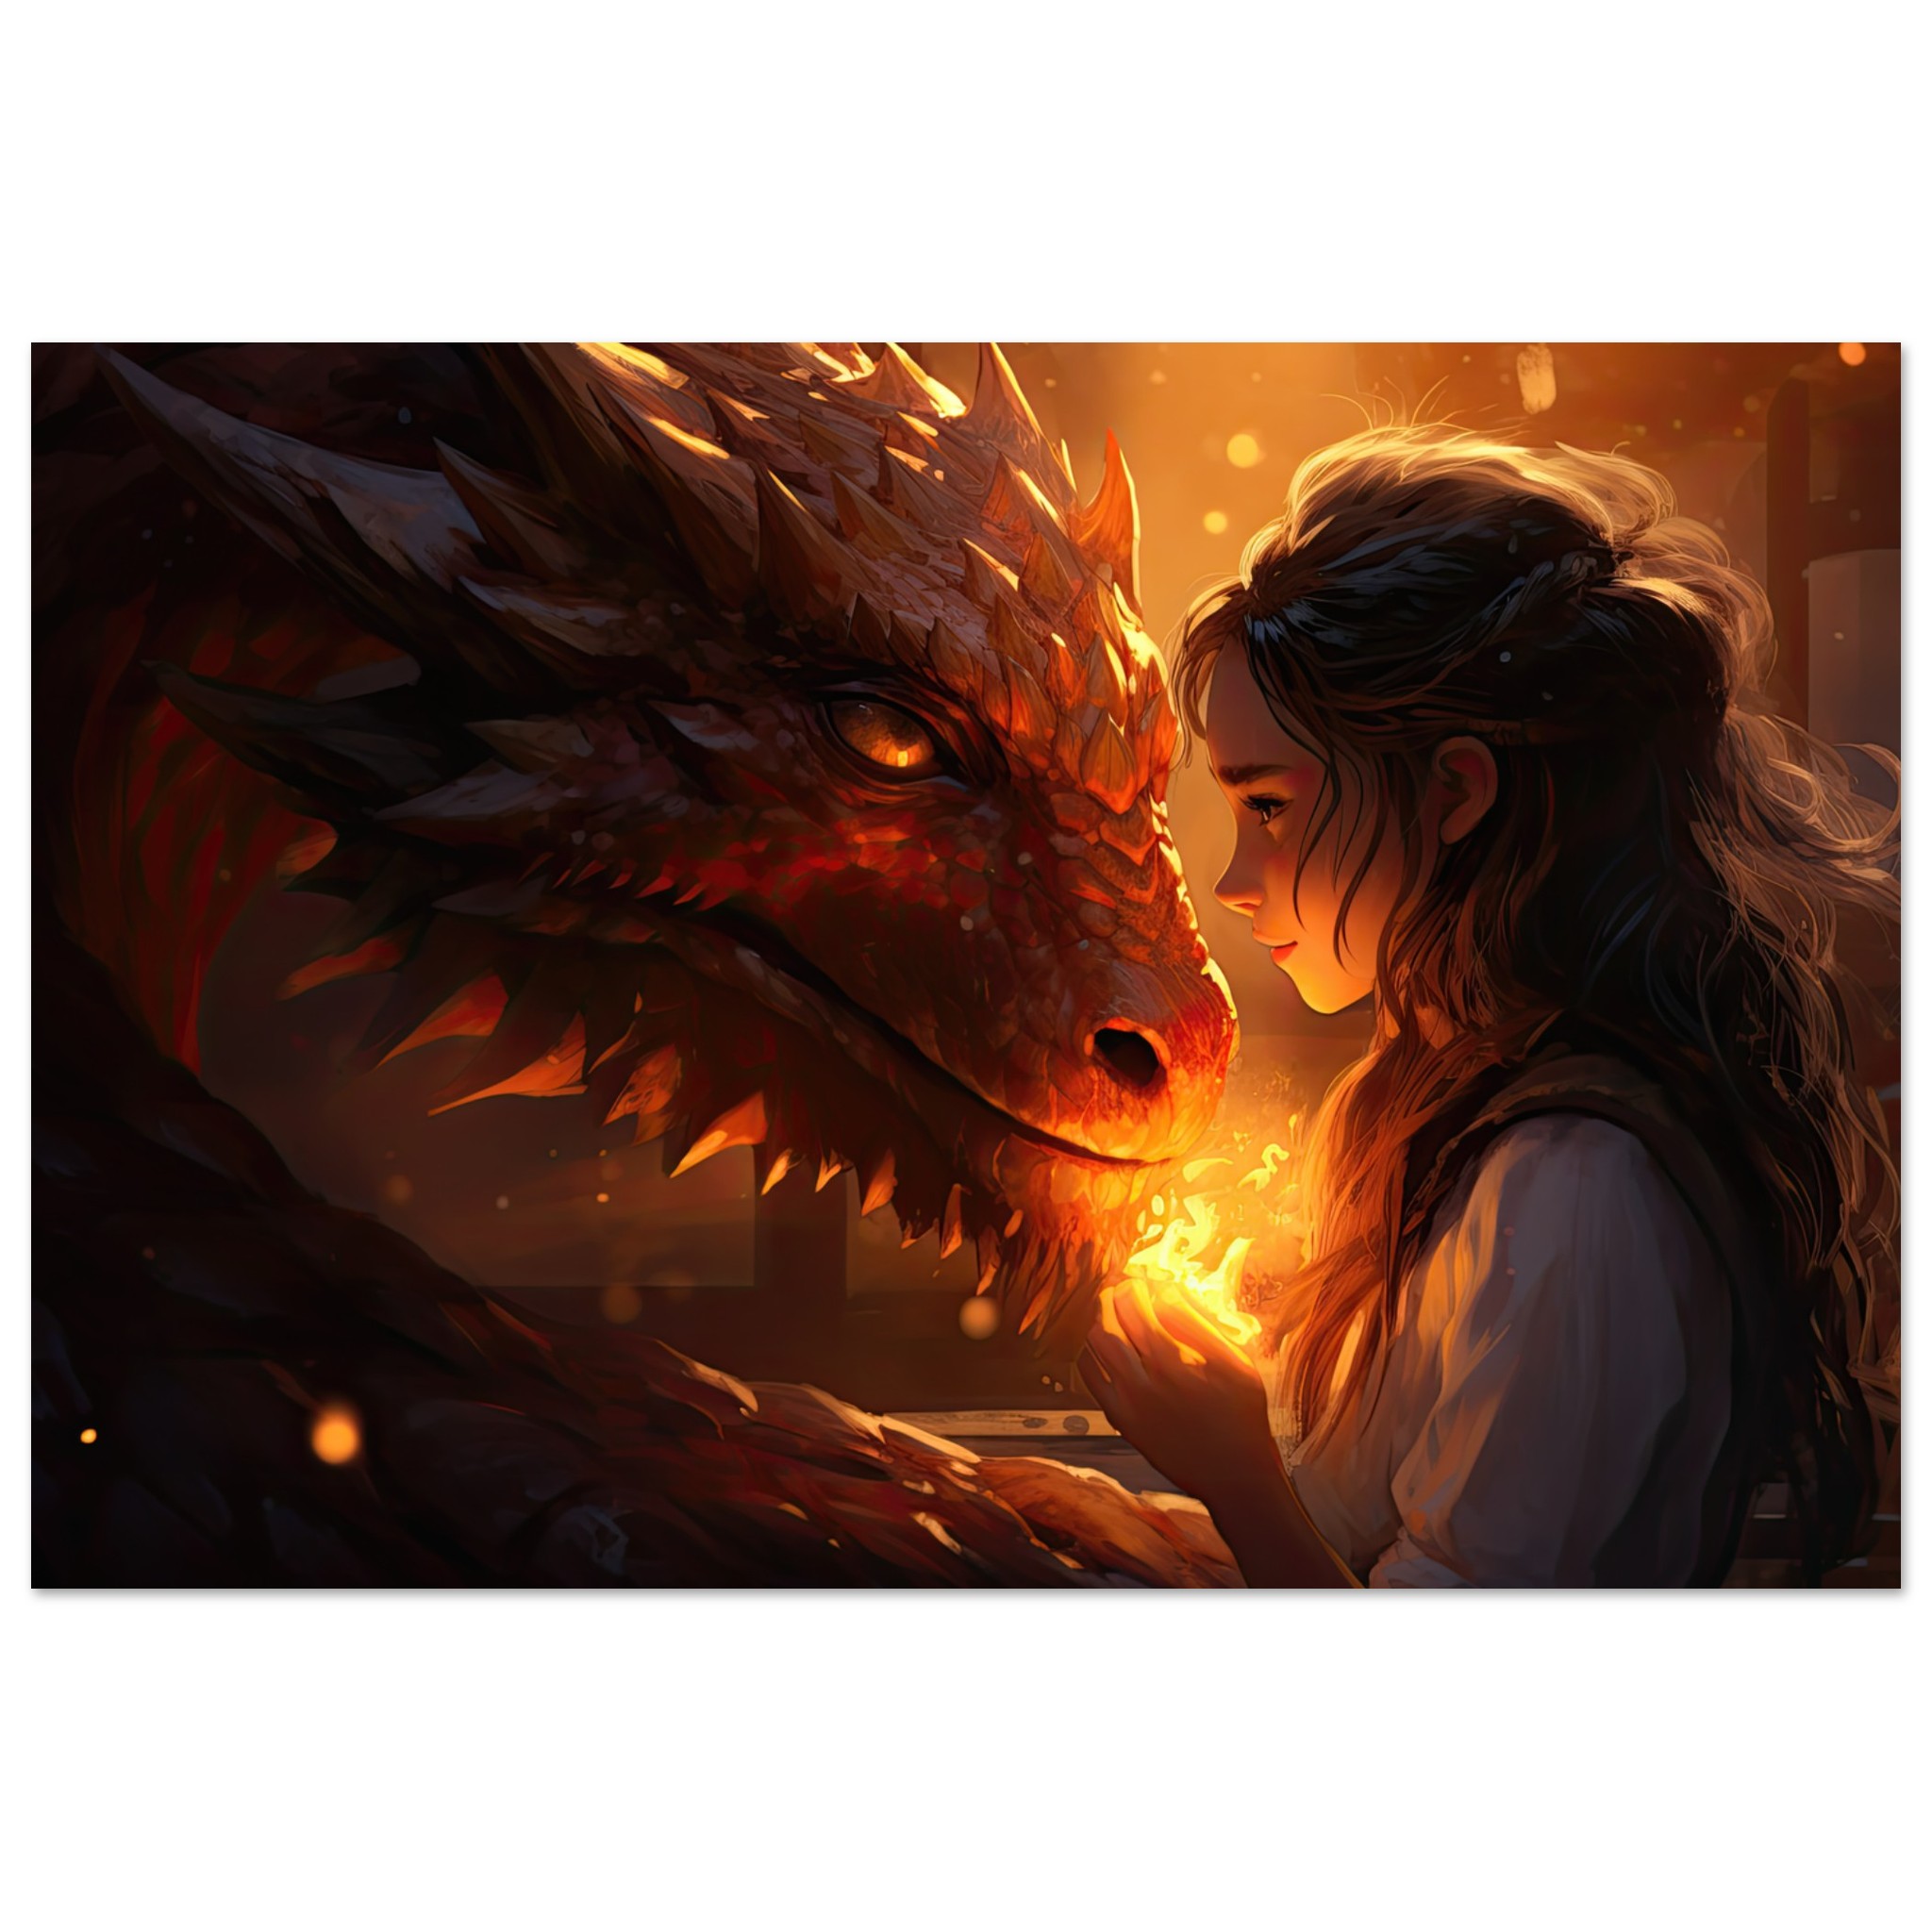 Magical Friendship - Girl and Dragon - Poster - 30x45 cm / 12x18″